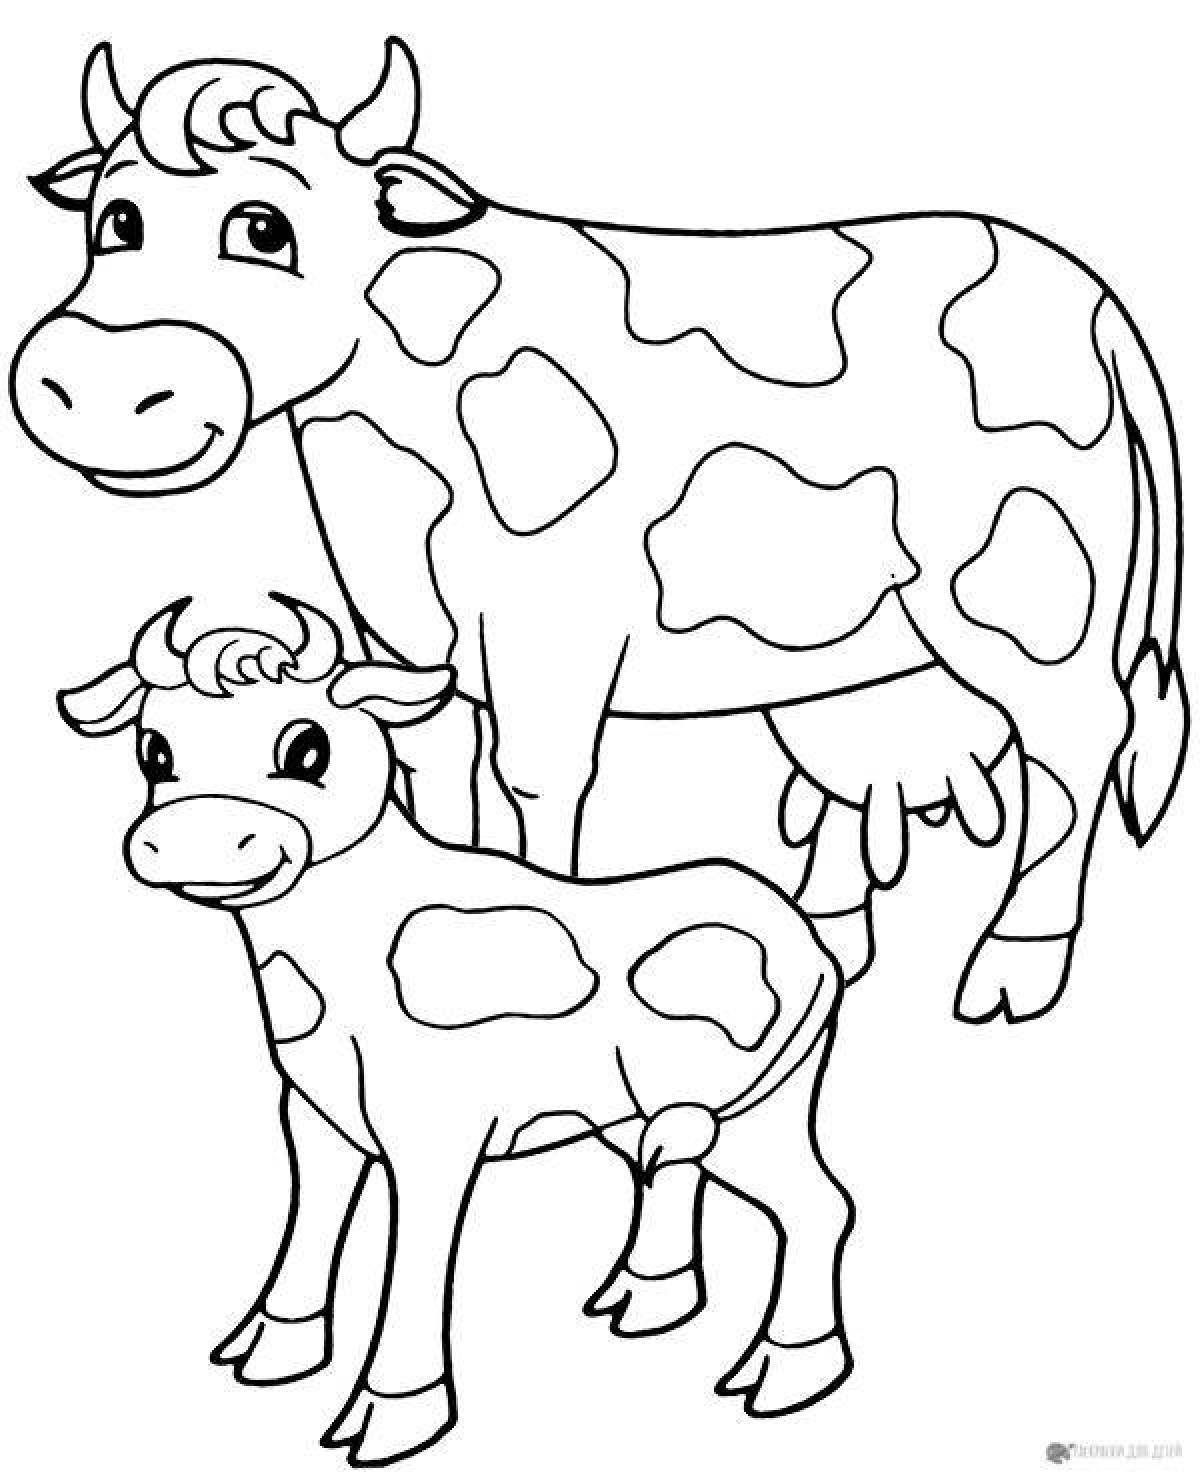 Coloring page cute cow and calf